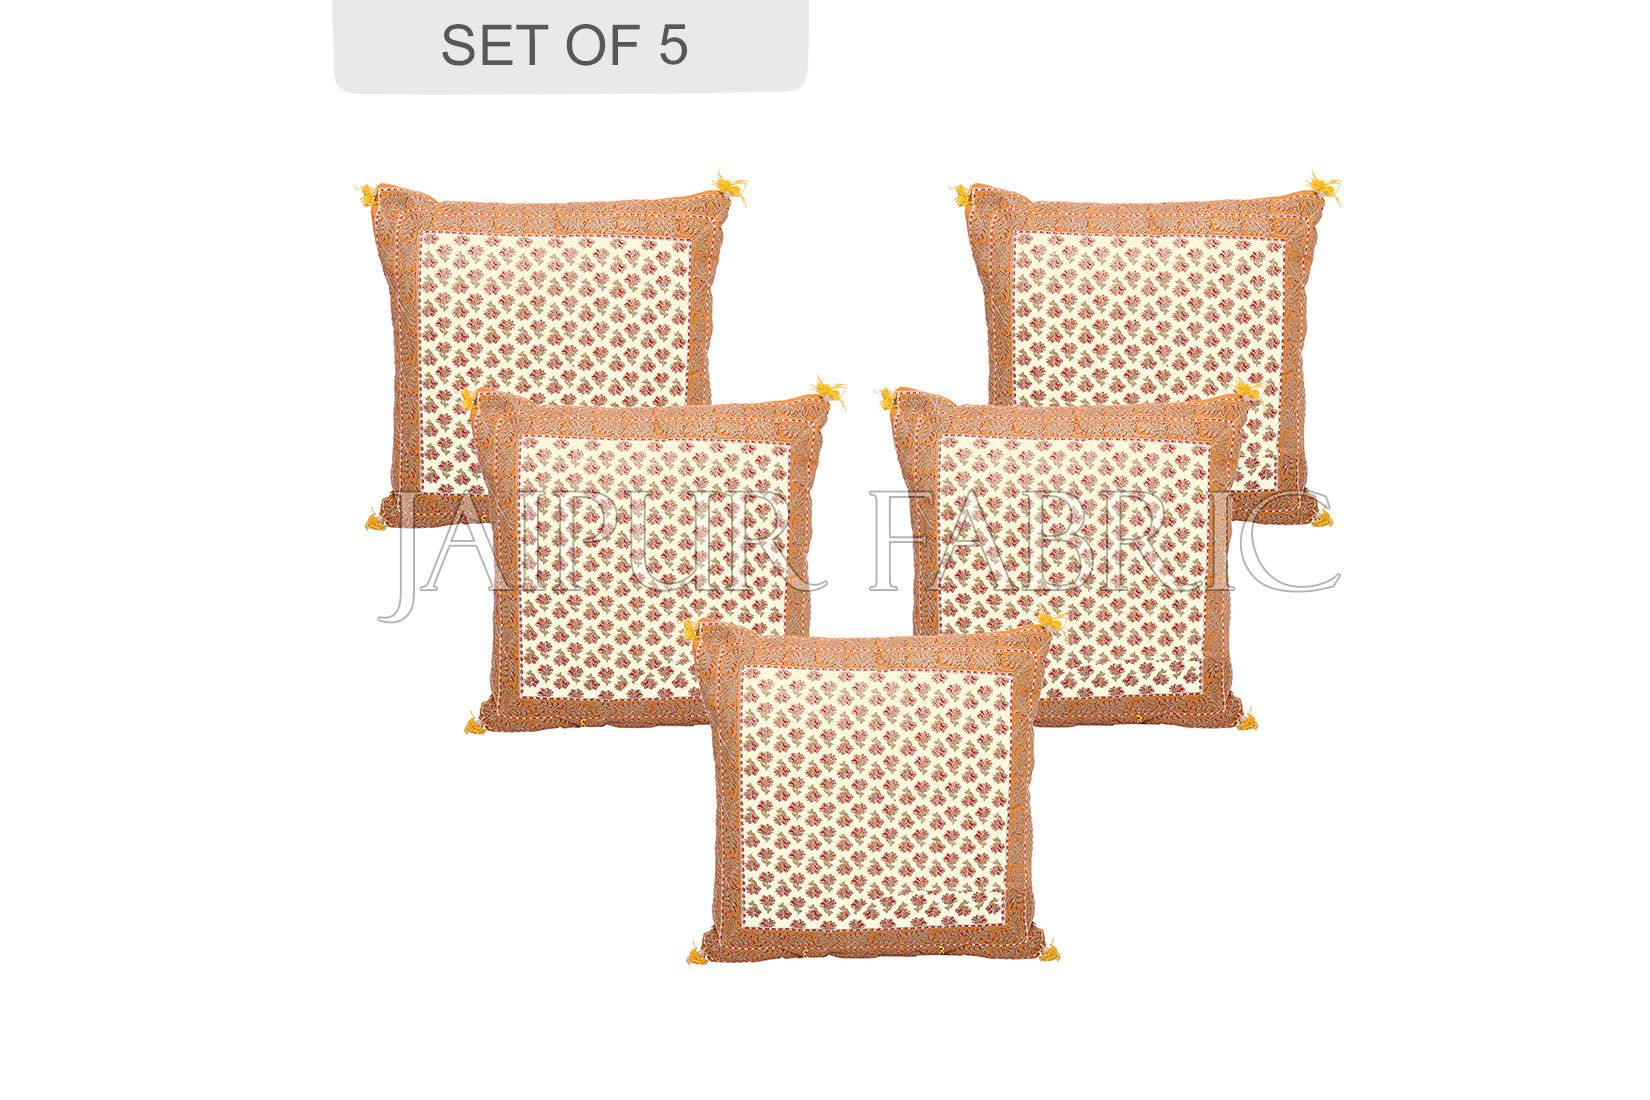 Orange Flower Print with Tropical Border Cotton Cushion Cover